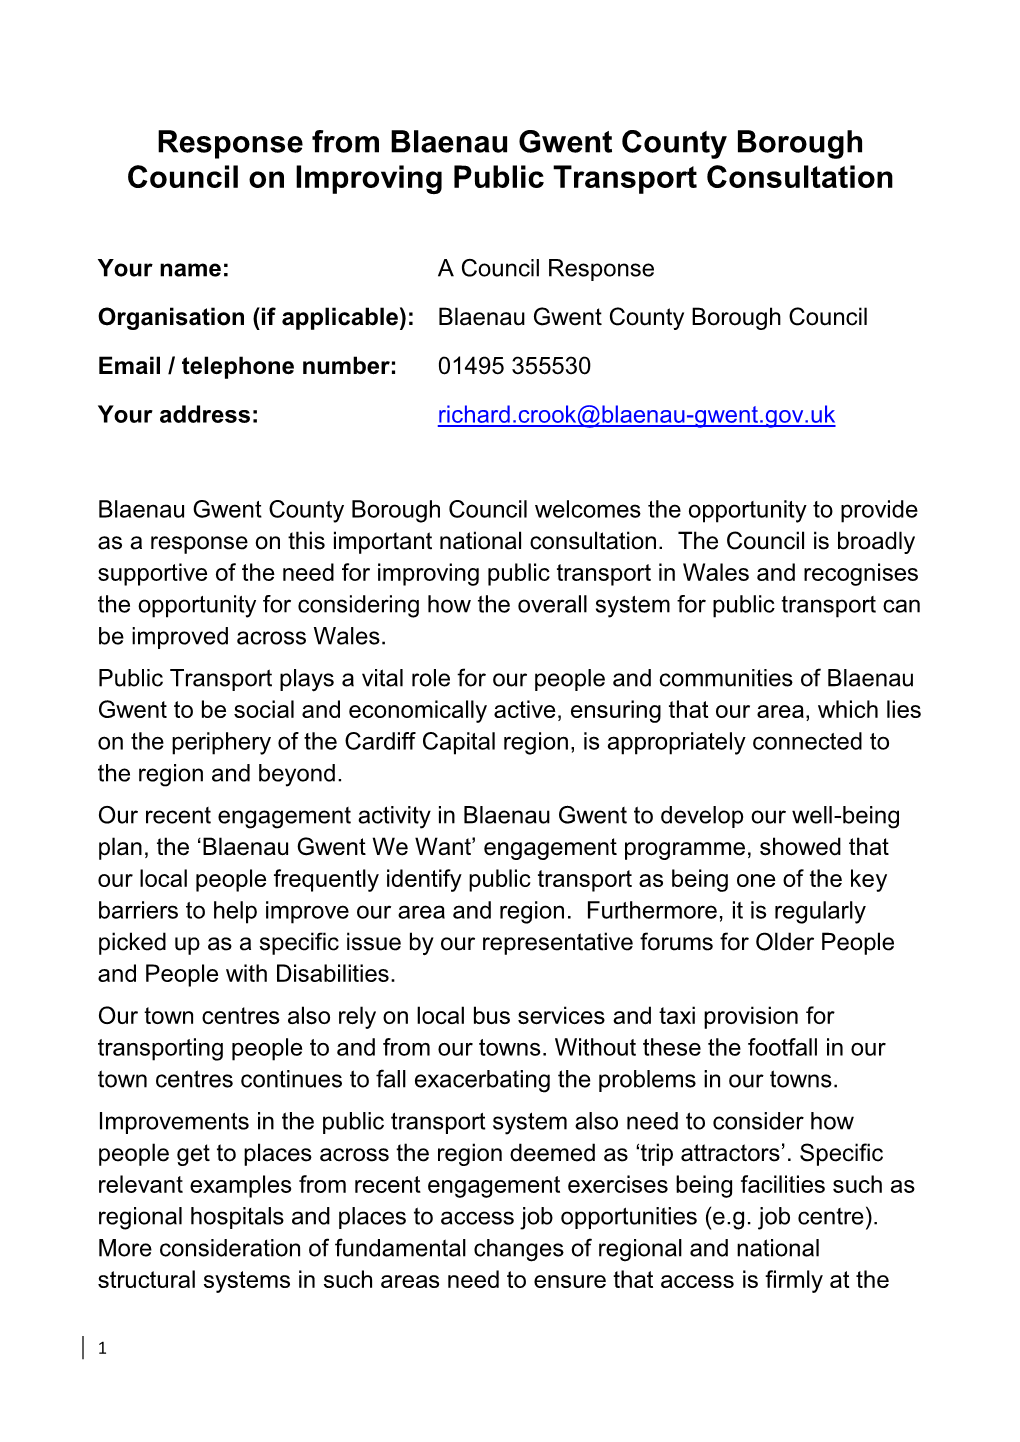 Response from Blaenau Gwent County Borough Council on Improving Public Transport Consultation